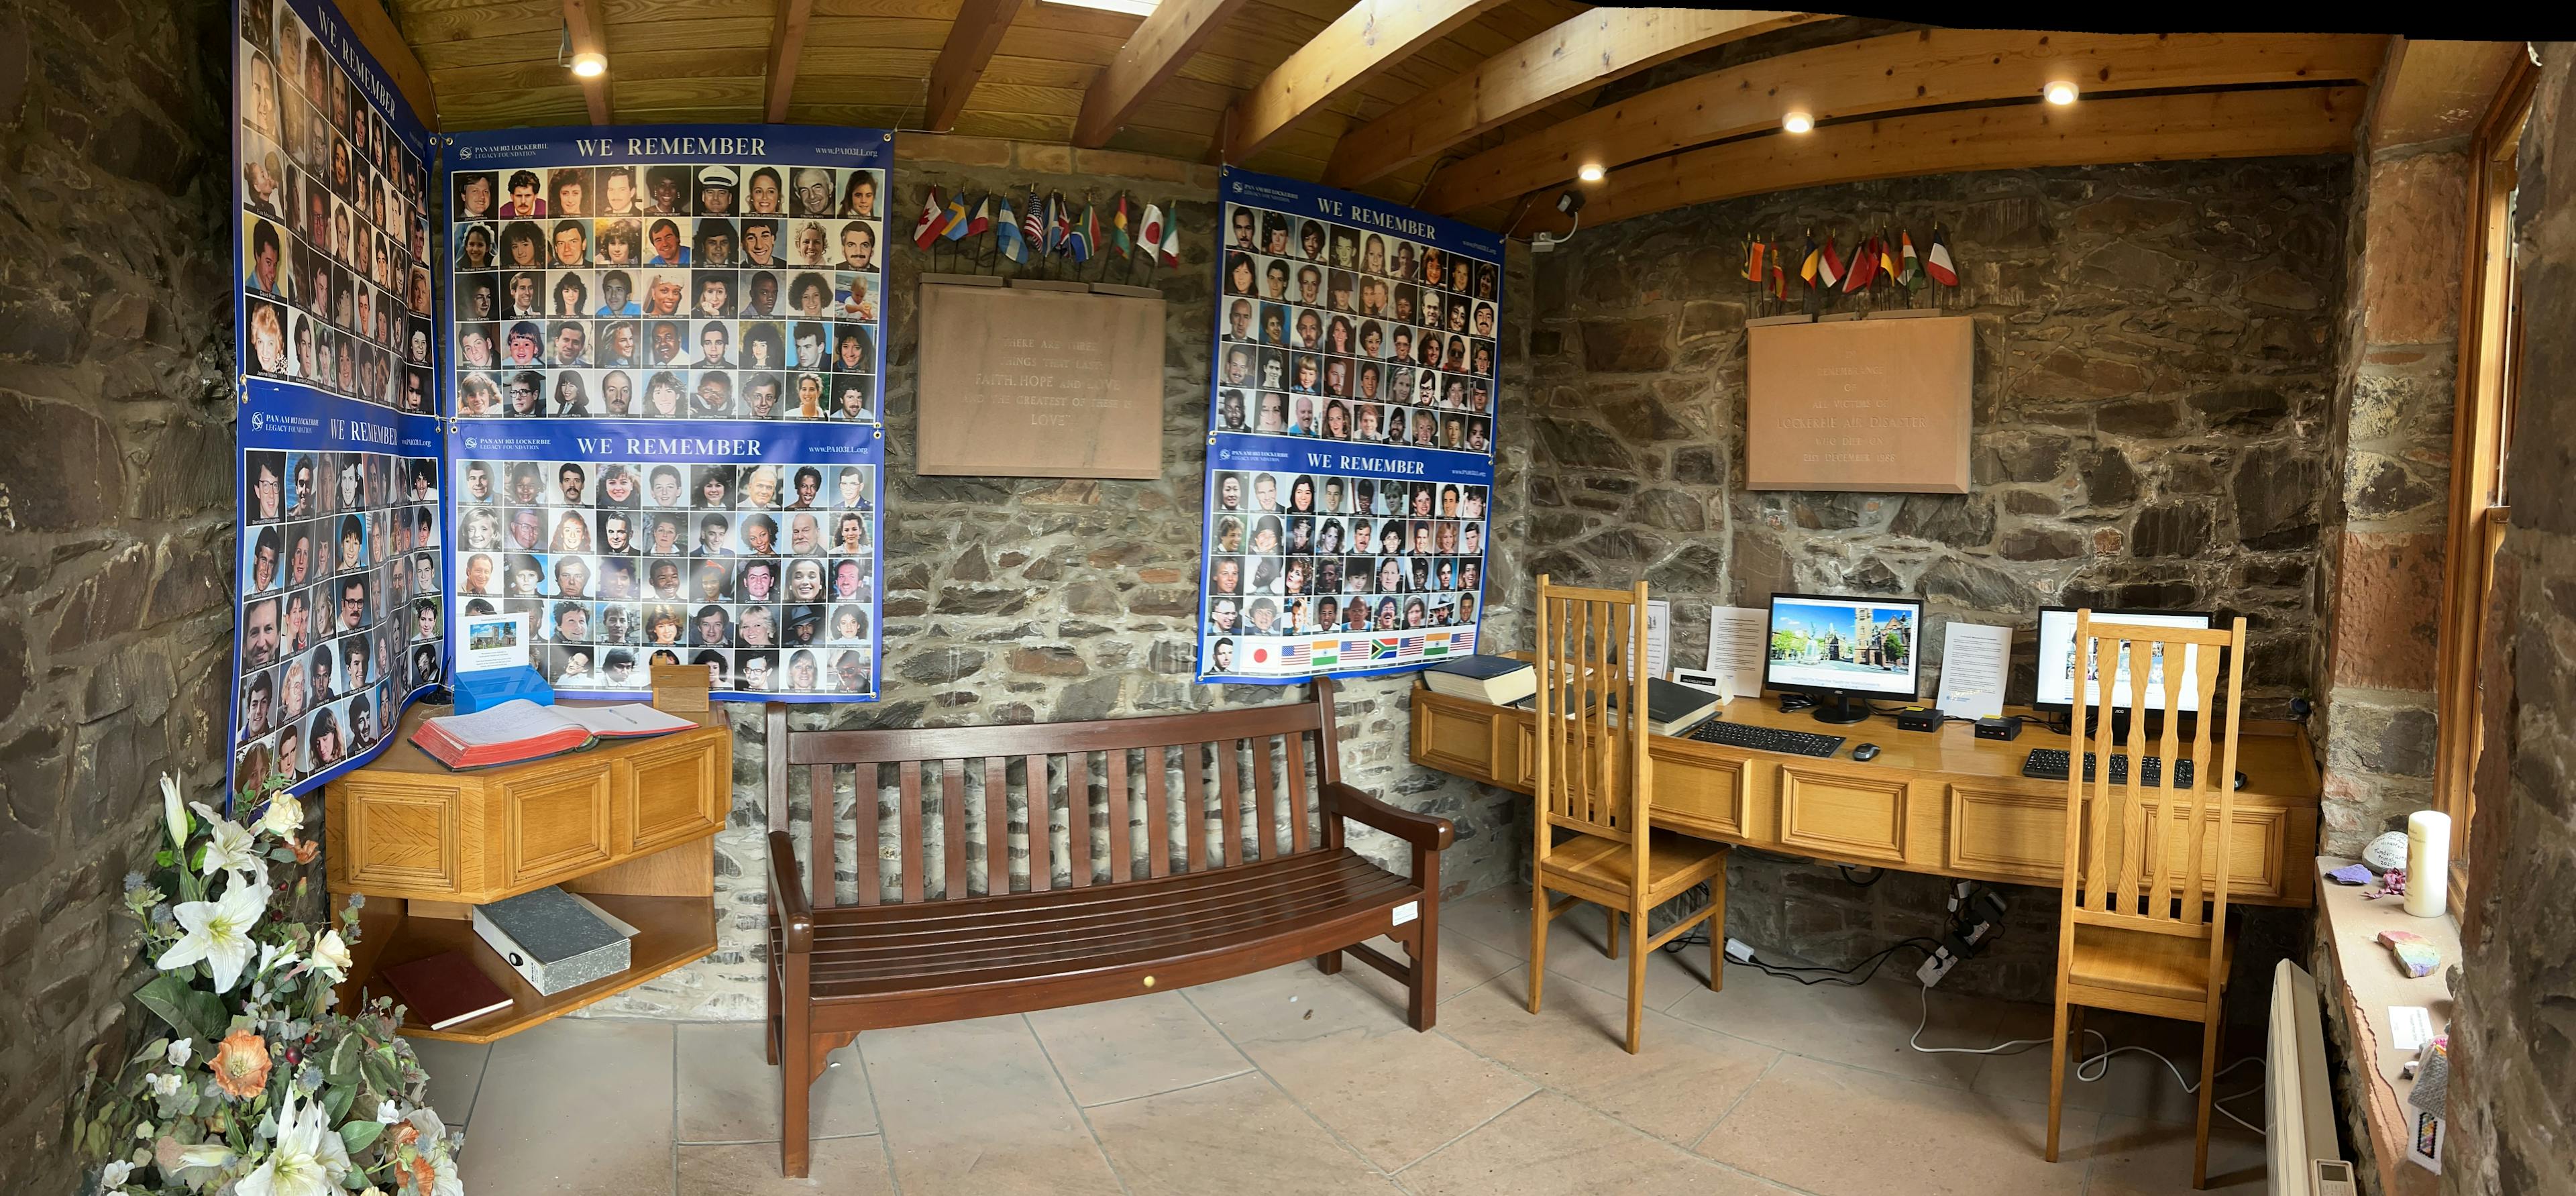 Six banners with the victim's photographs hung on the walls of Tundergarth Memorial Room